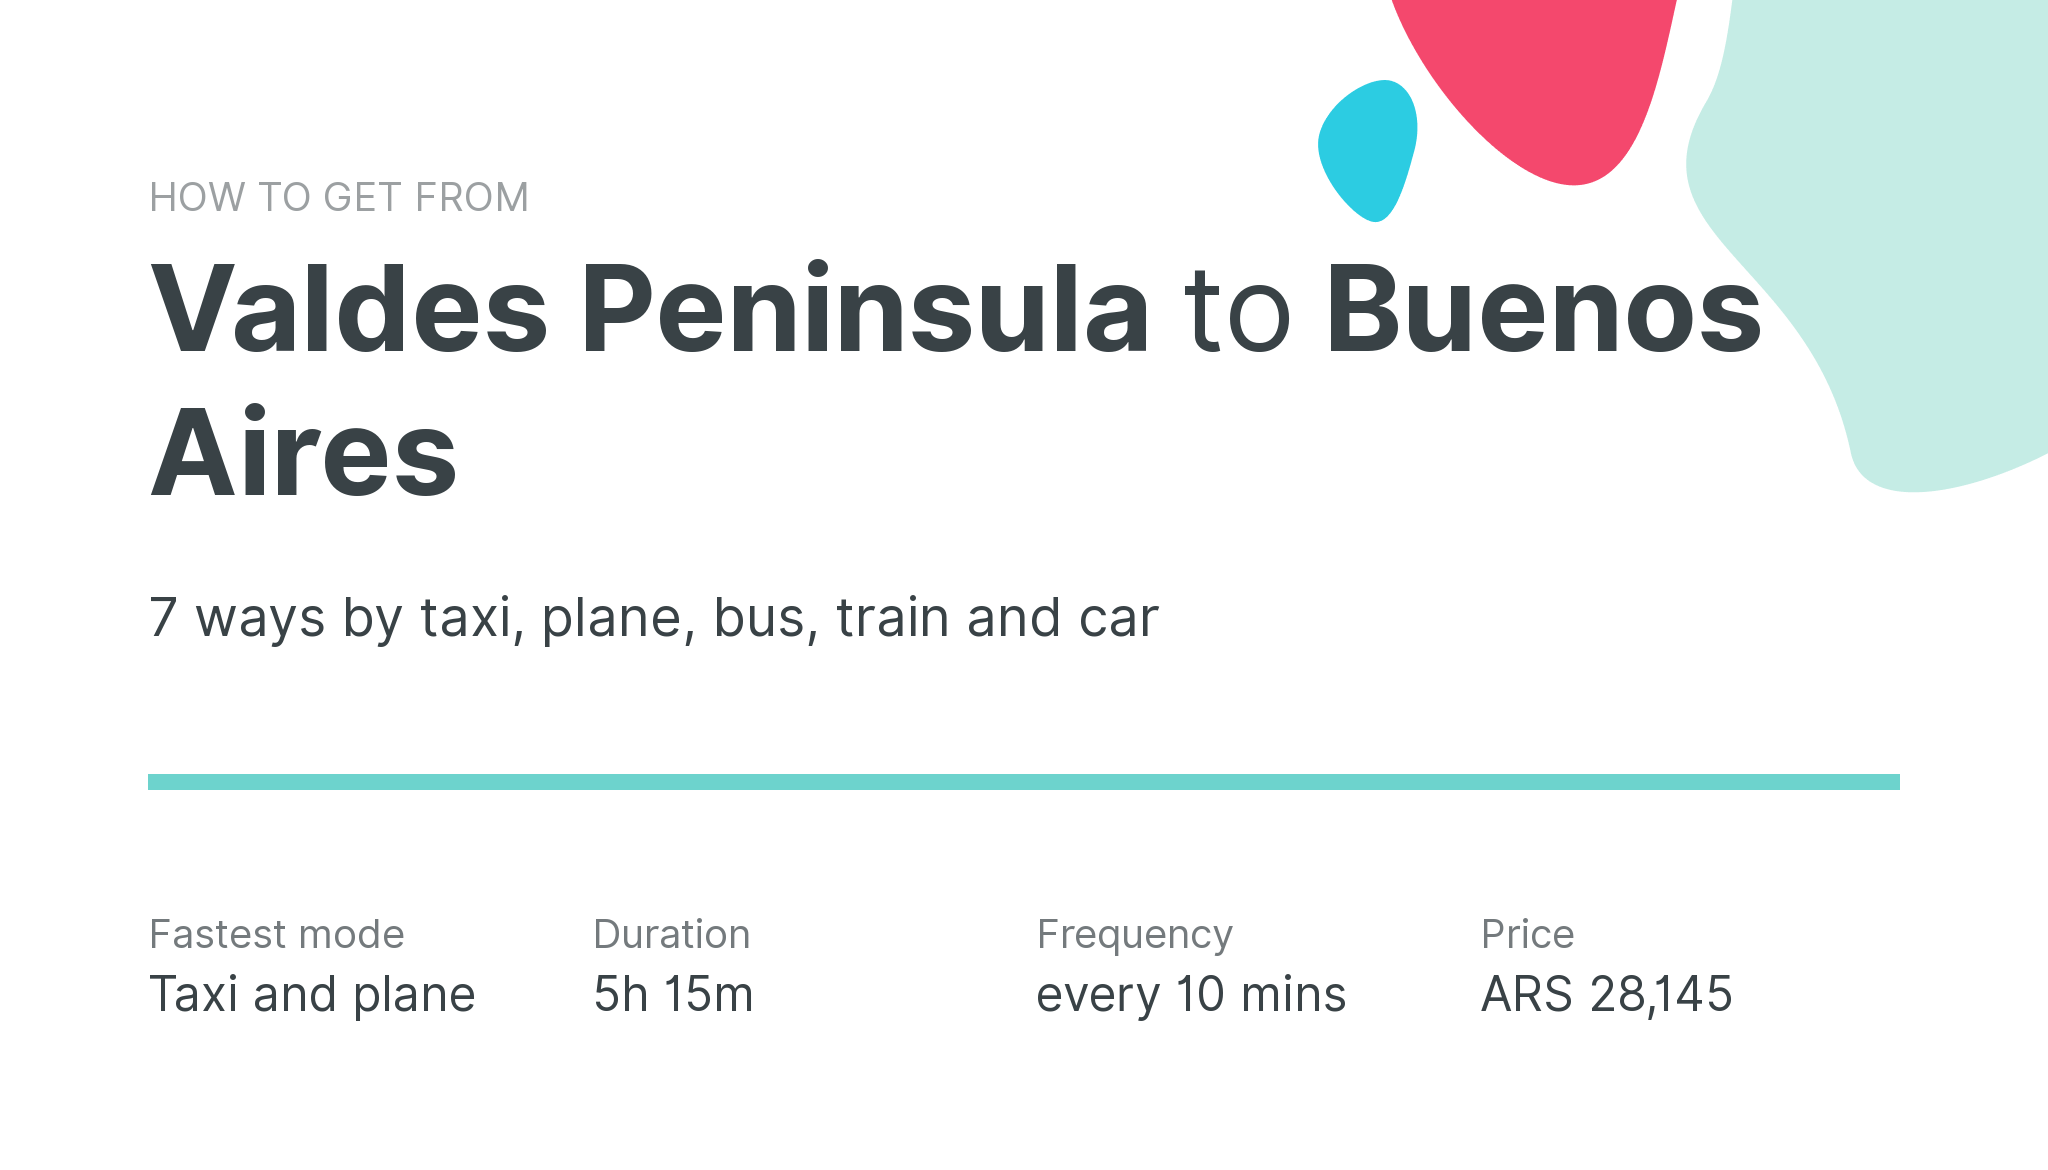 How do I get from Valdes Peninsula to Buenos Aires